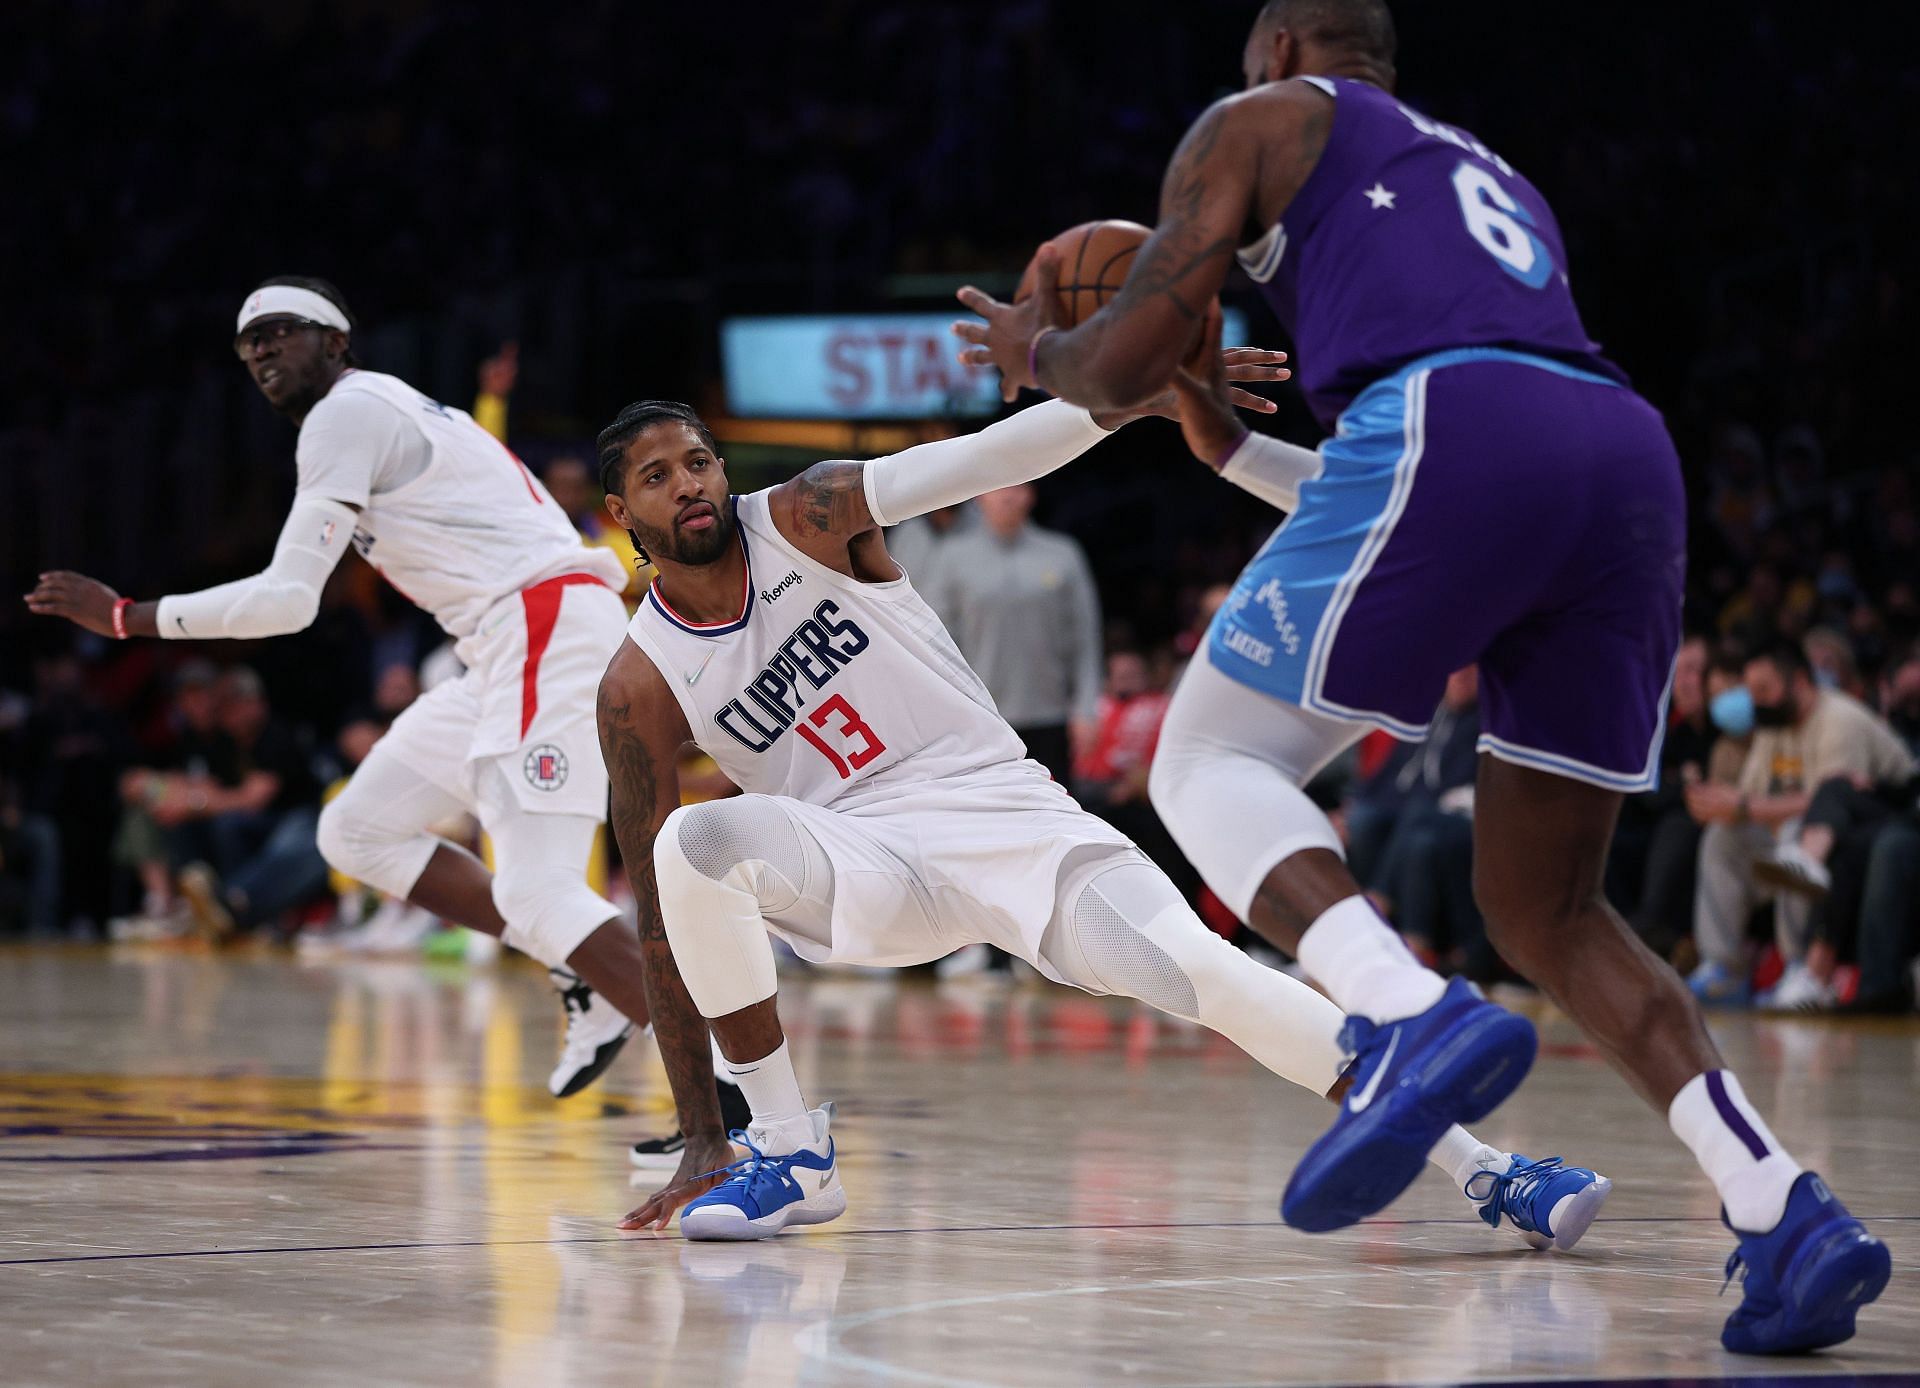 Paul George #13 and Reggie Jackson #1 of the LA Clippers scramble back on defense as LeBron James #6 of the Los Angeles Lakers dribbles the ball.